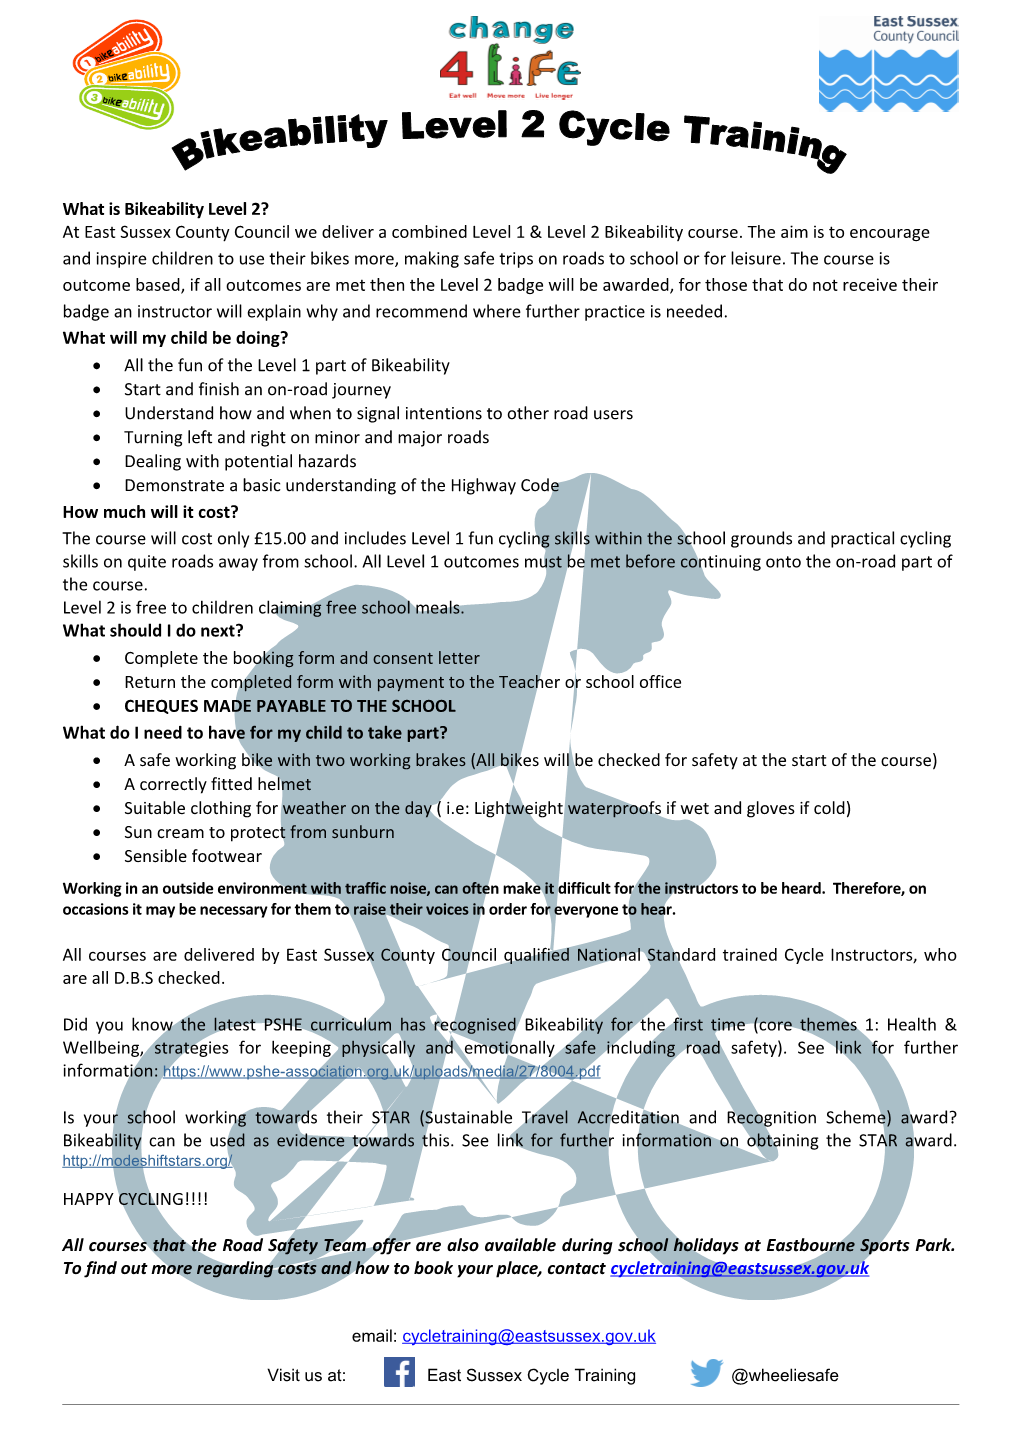 What Is Bikeability Level 2?